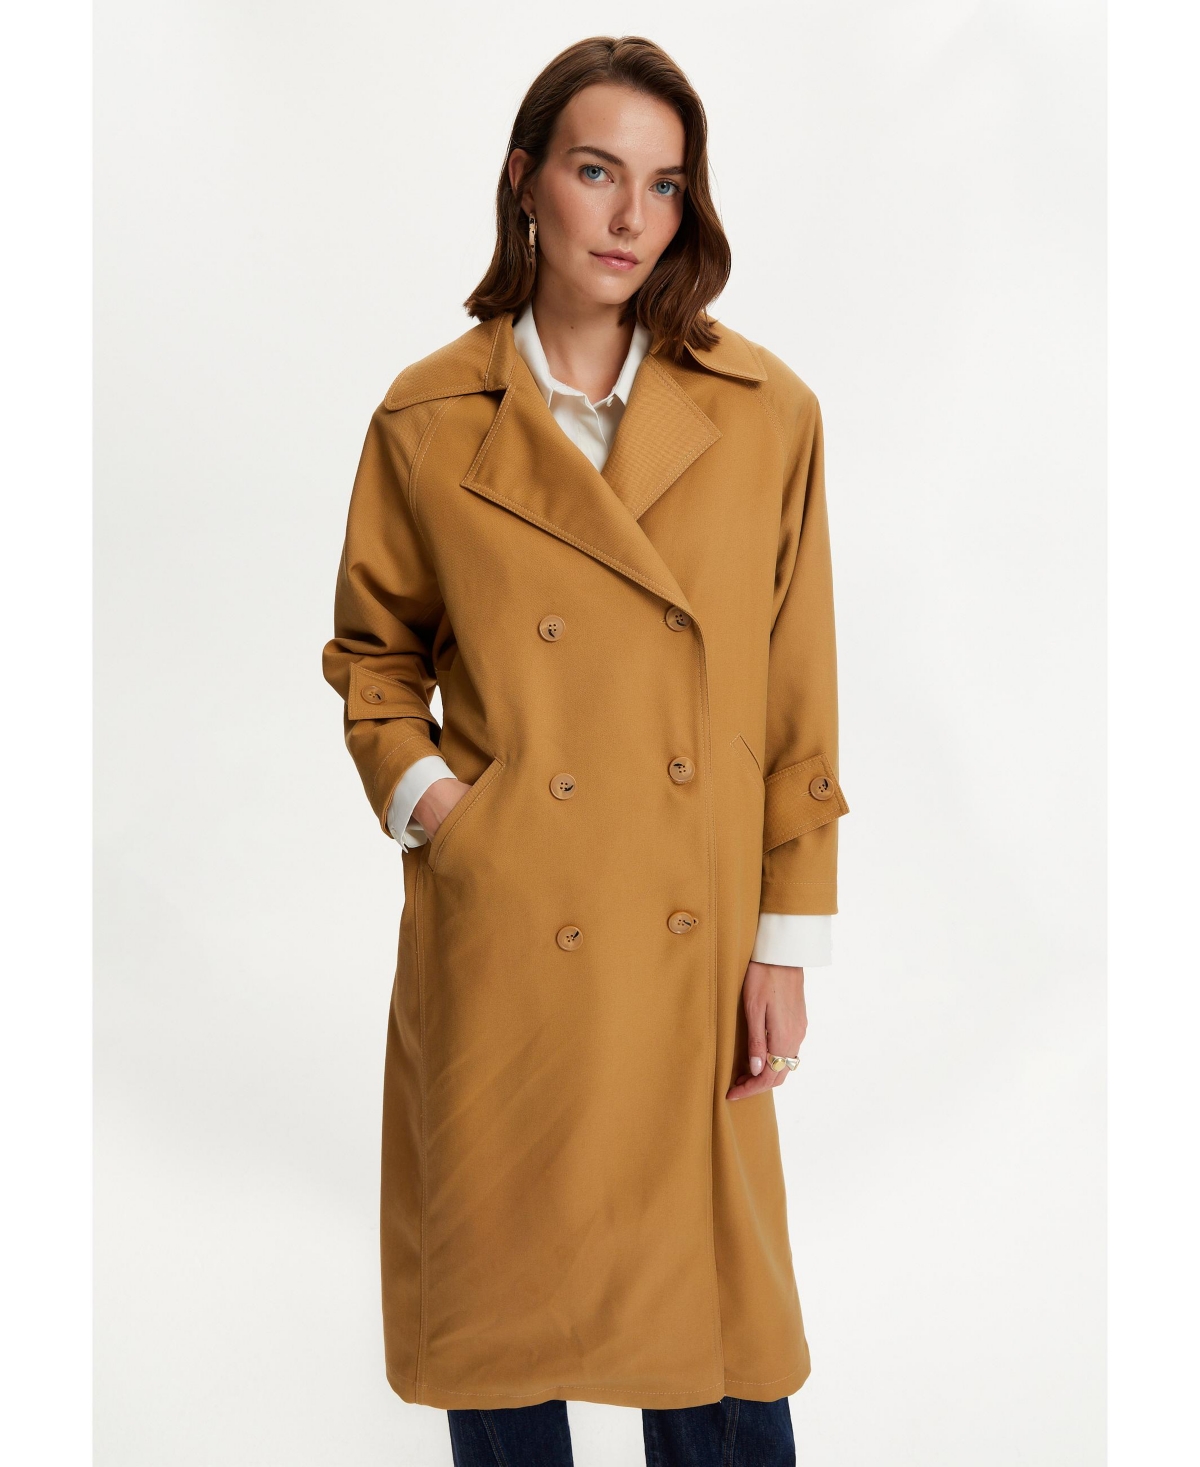 NOCTURNE WOMEN'S DOUBLE BREASTED OVERSIZED TRENCH COAT